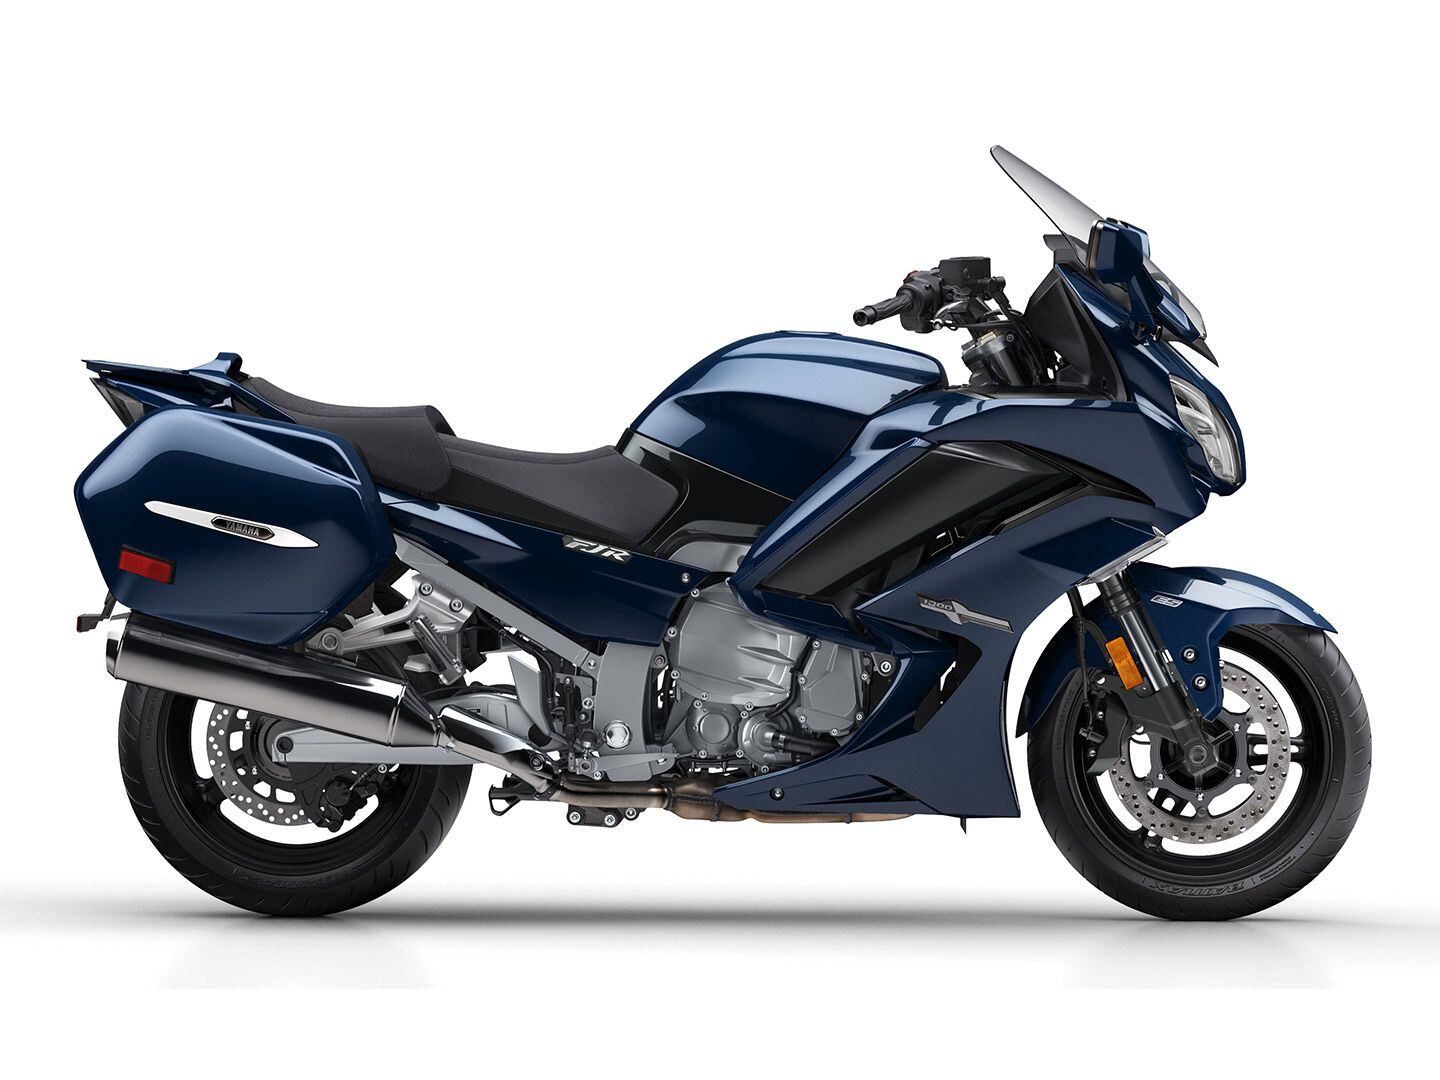 The Yamaha FJR1300ES is a stalwart in the sport-touring category. With refined power delivery, electronically adjustable suspension, and room for luggage and a pillion, the FJR is a sensible choice for sporty touring.